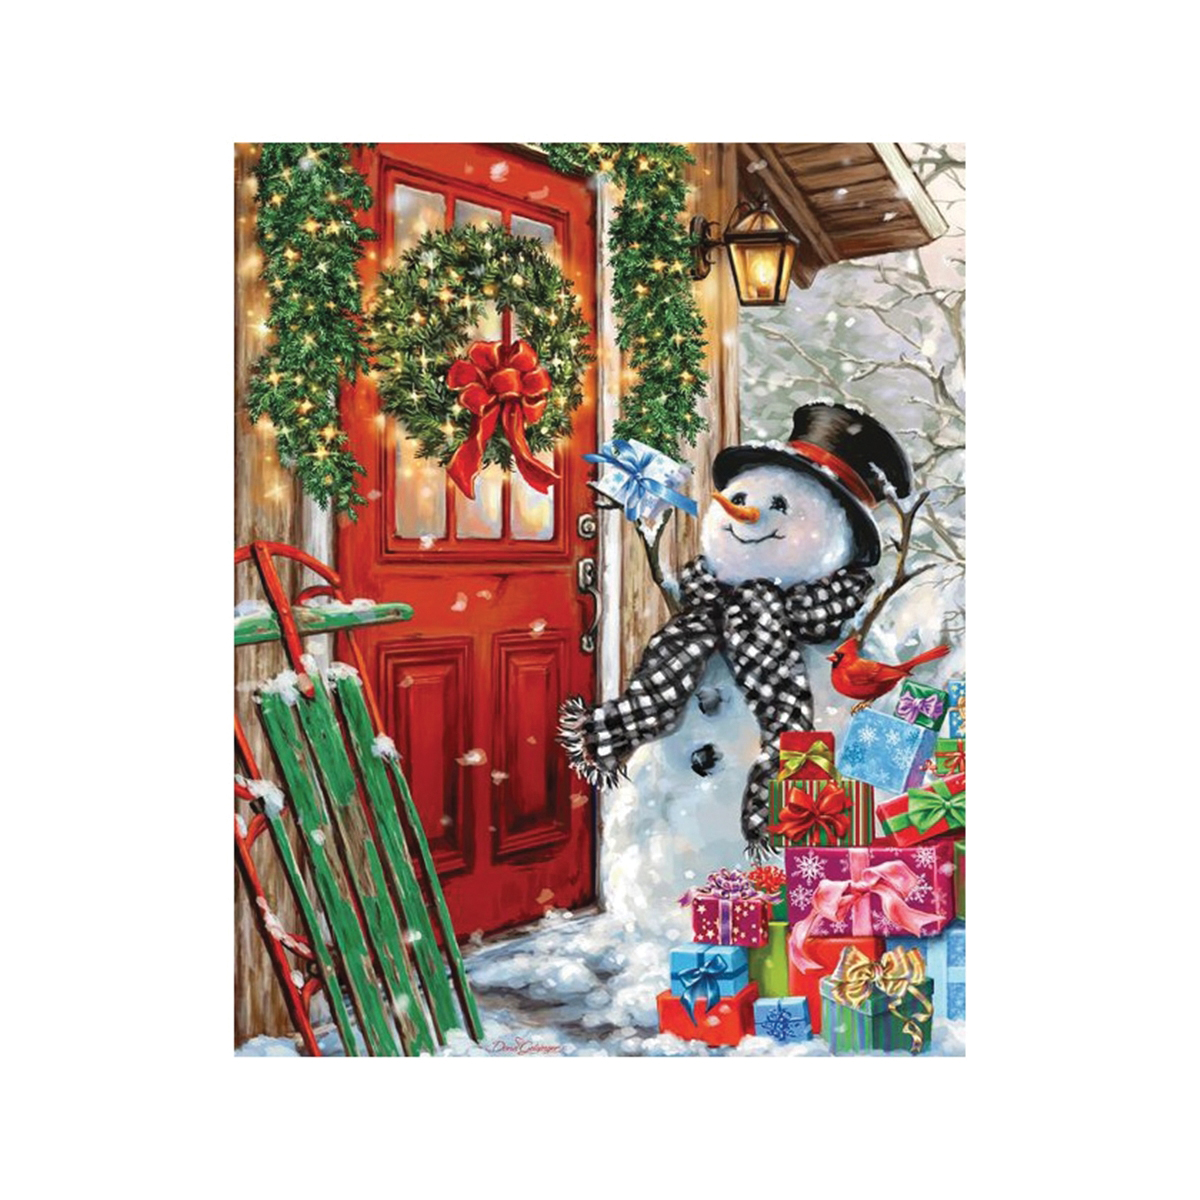 Allied 34-11030 Jigsaw Puzzle, 3 Years and Up - 1